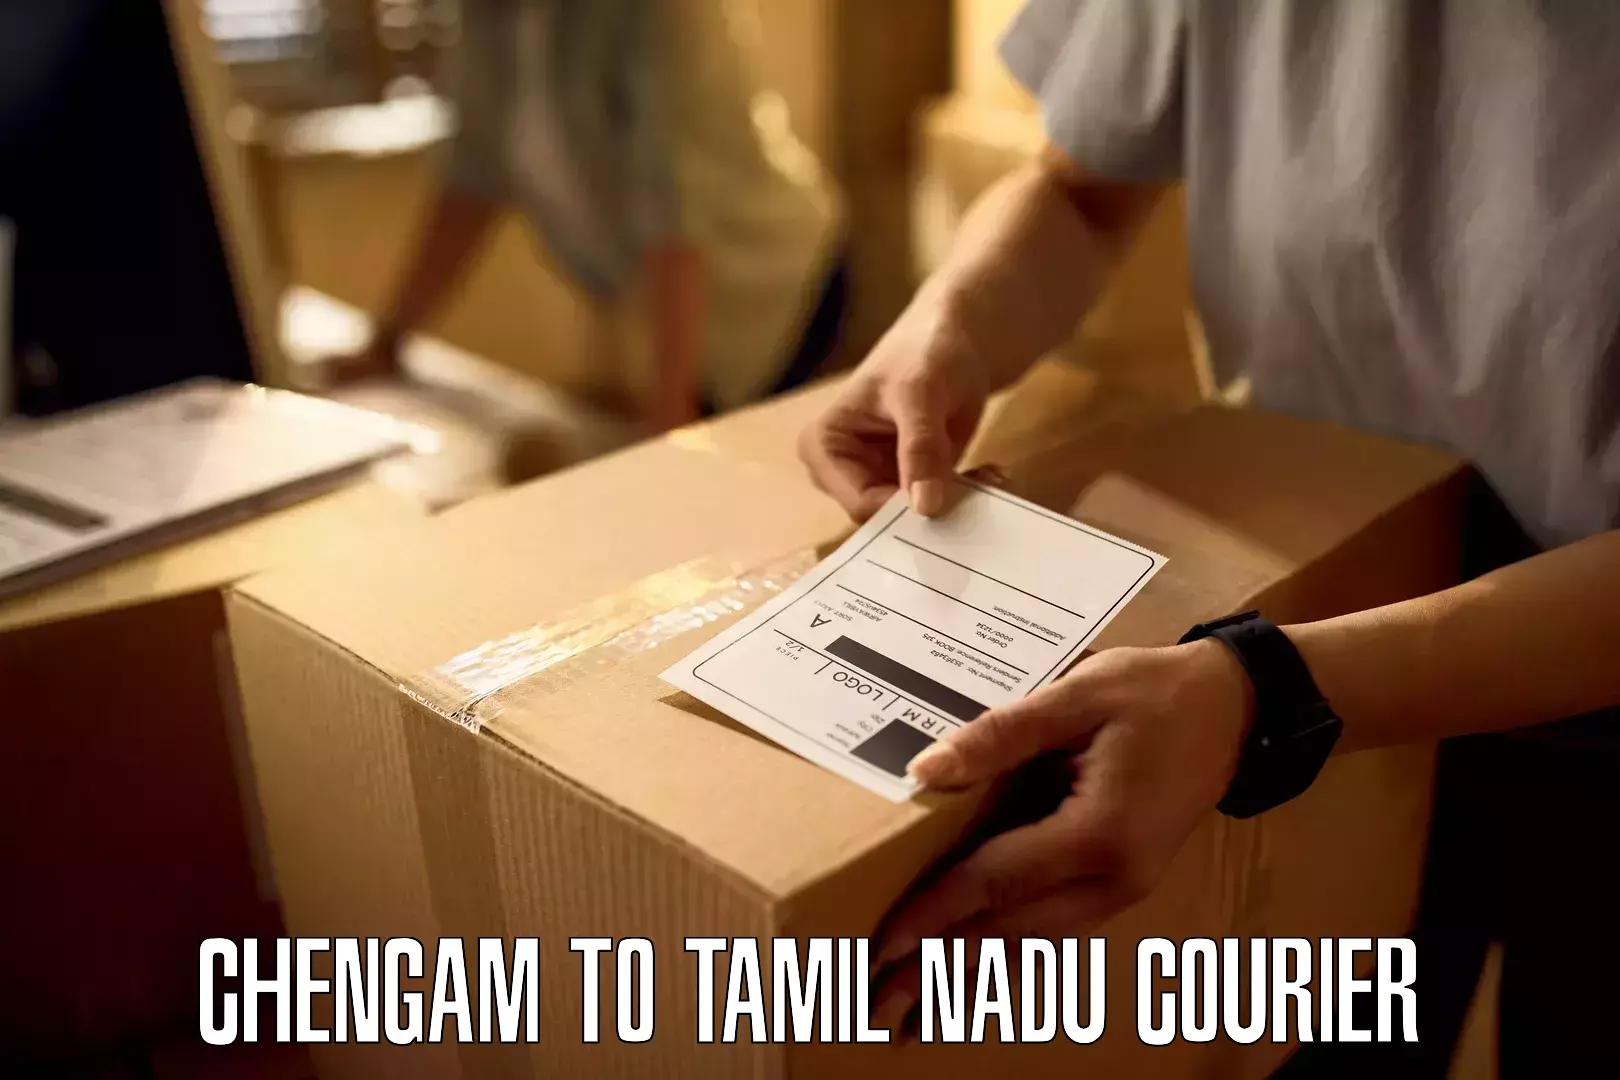 Optimized shipping routes Chengam to Tamil Nadu